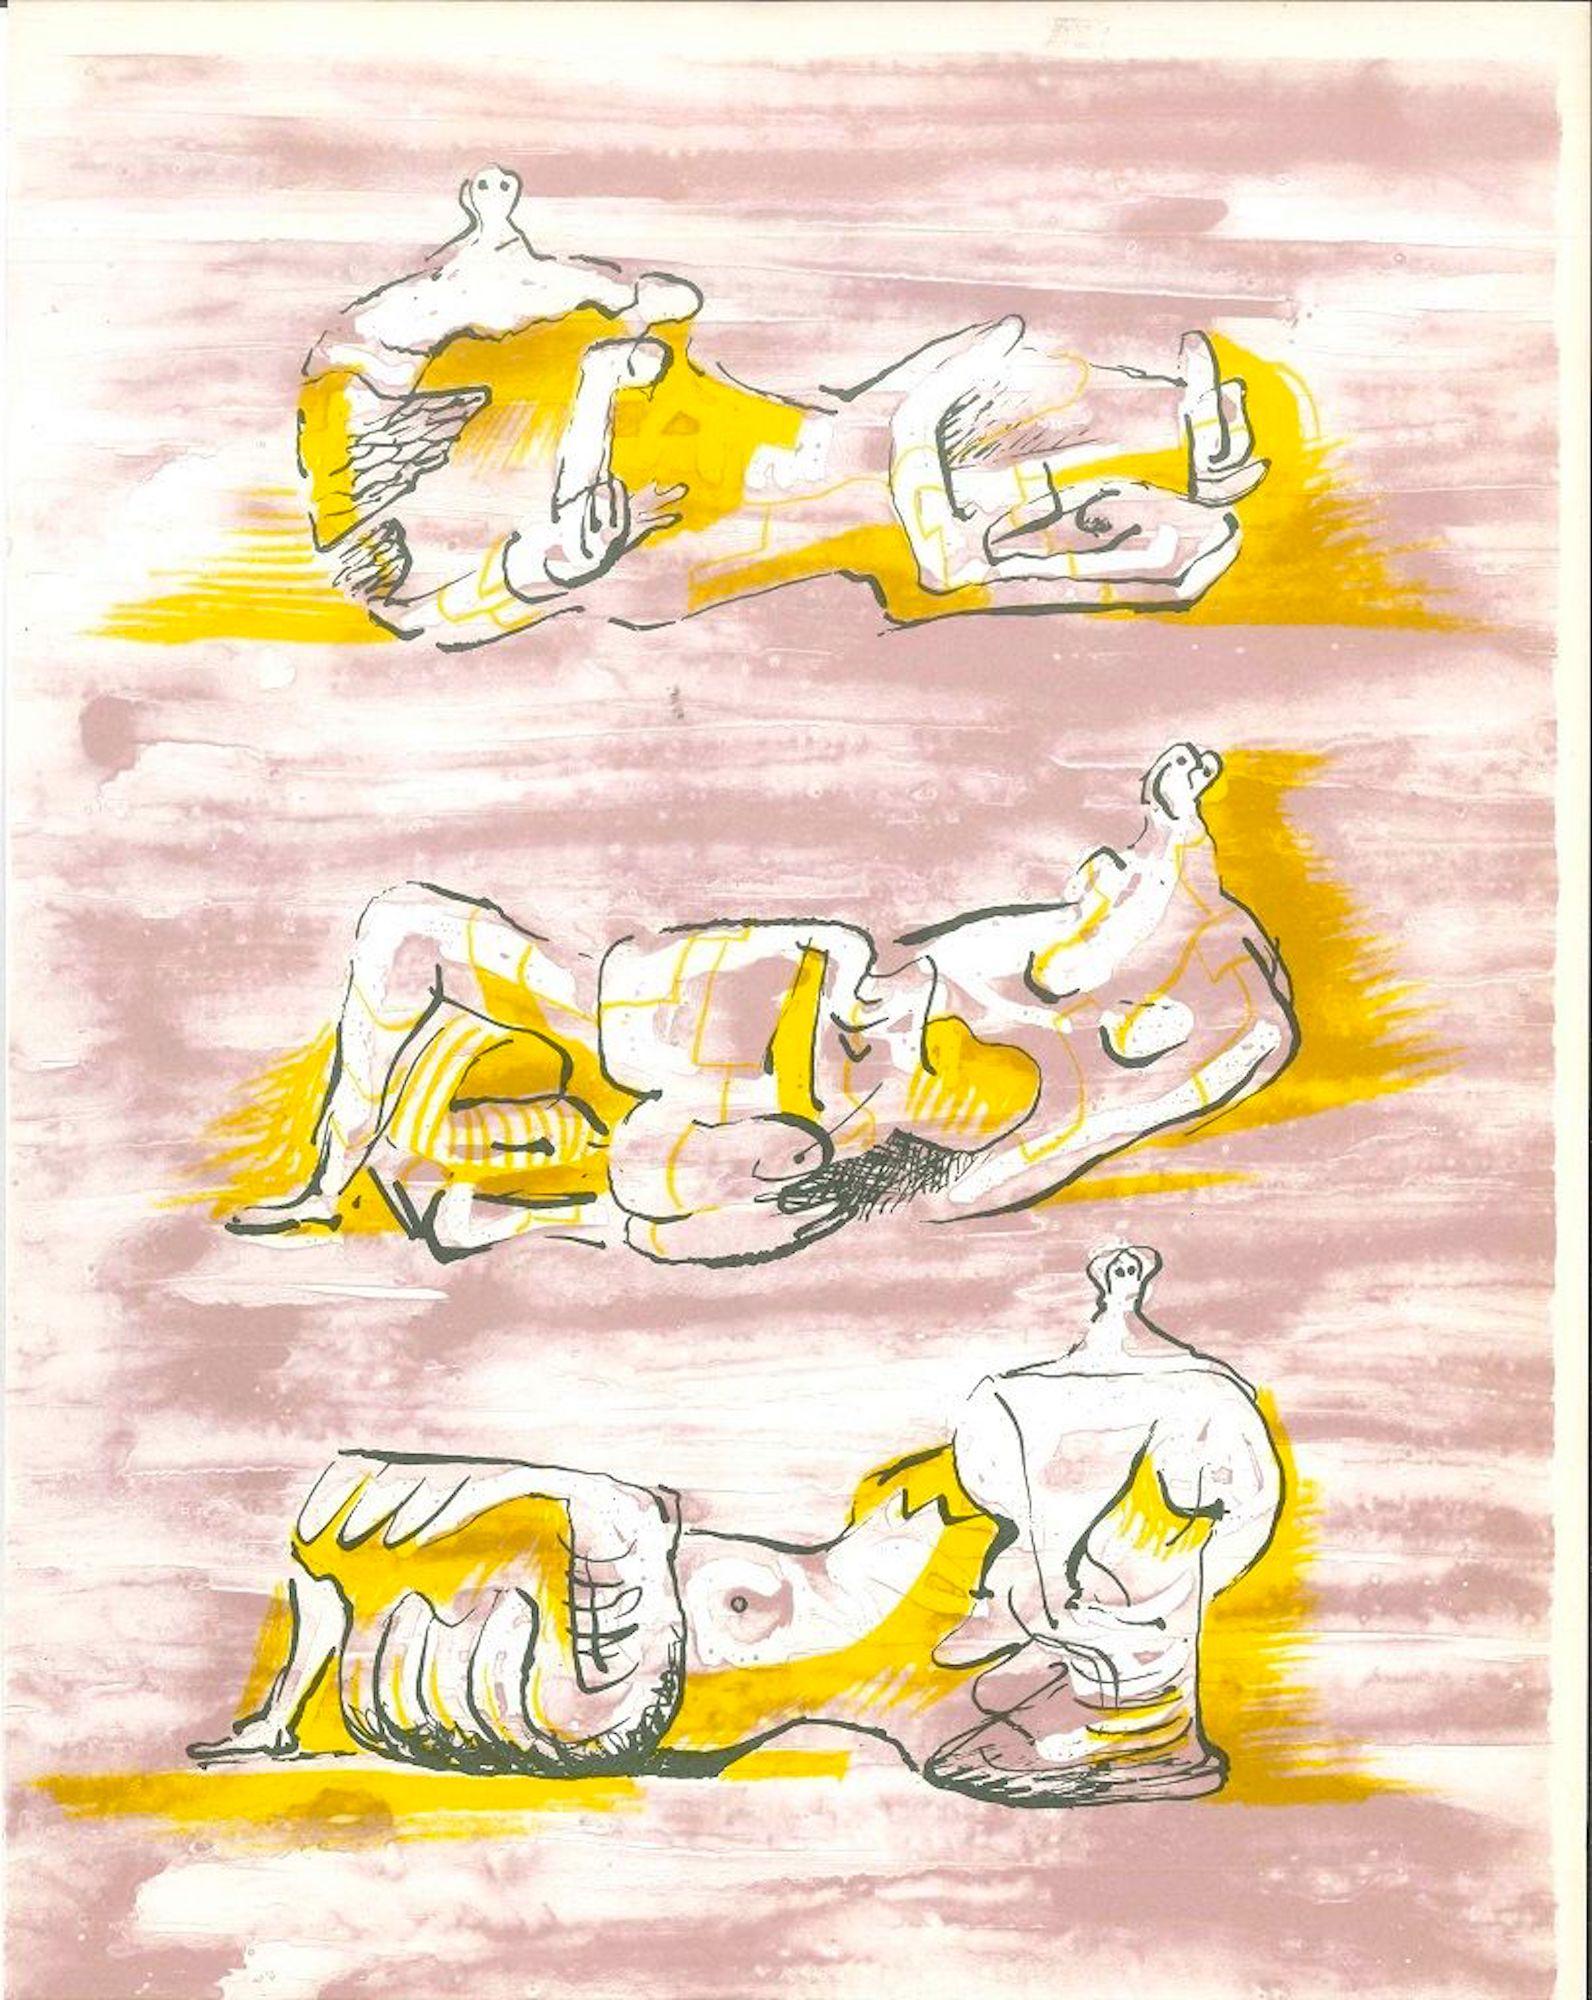 The Reclining Figures is a print realized by the British artist  Henry Moore (Castleford 1898 - Much Hadham 1986).

This color lithograph on paper, was edited by the French magazine "XXe Siécle", and published on the Panorama 71- , number issue